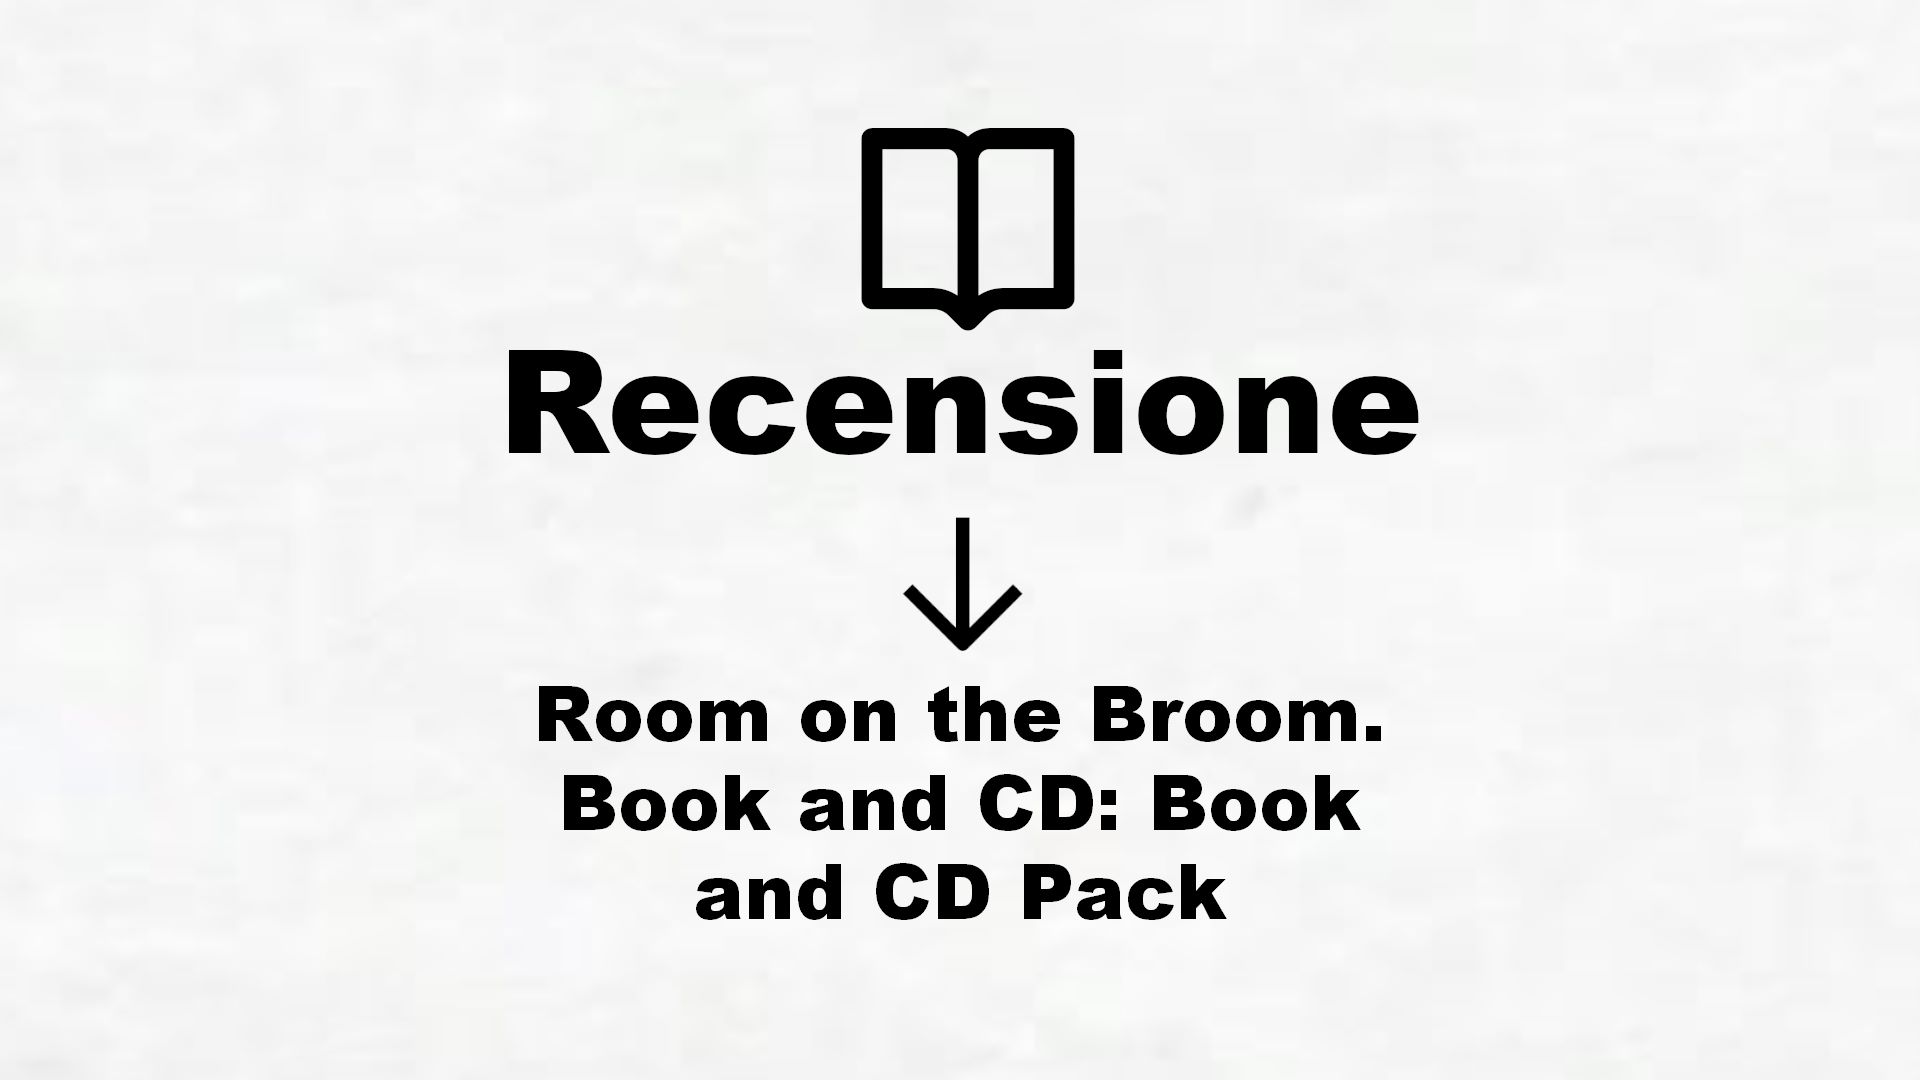 Room on the Broom. Book and CD: Book and CD Pack – Recensione Libro